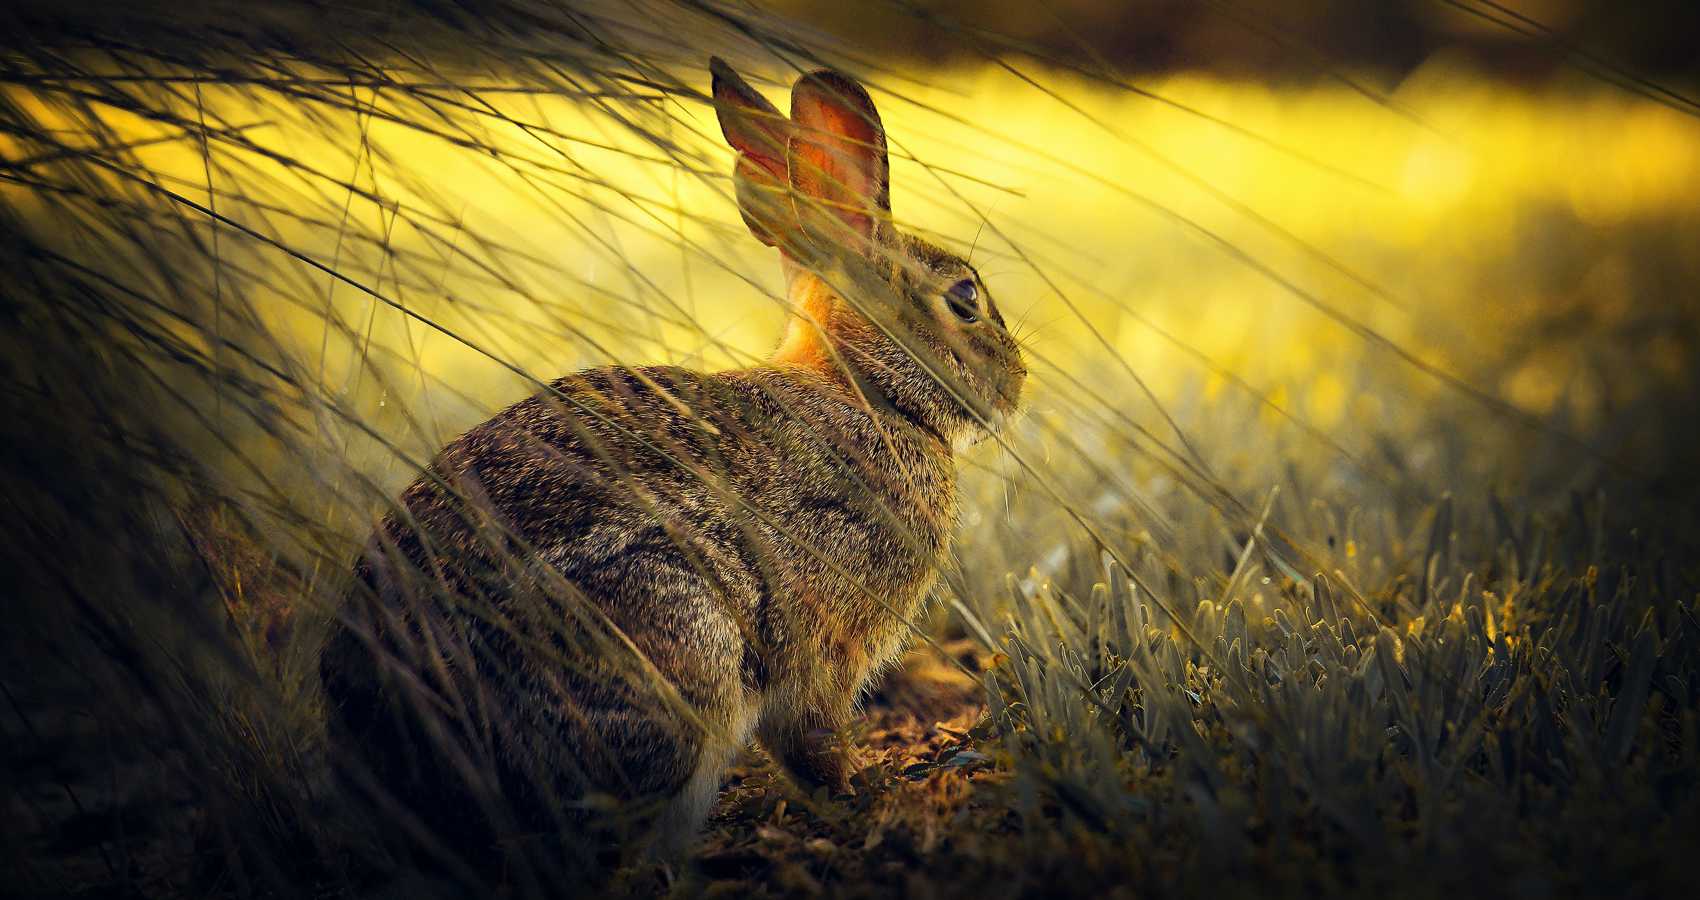 Giving The Wild Hare His Voice, poetry by Lynn Chateau at Spillwords.com